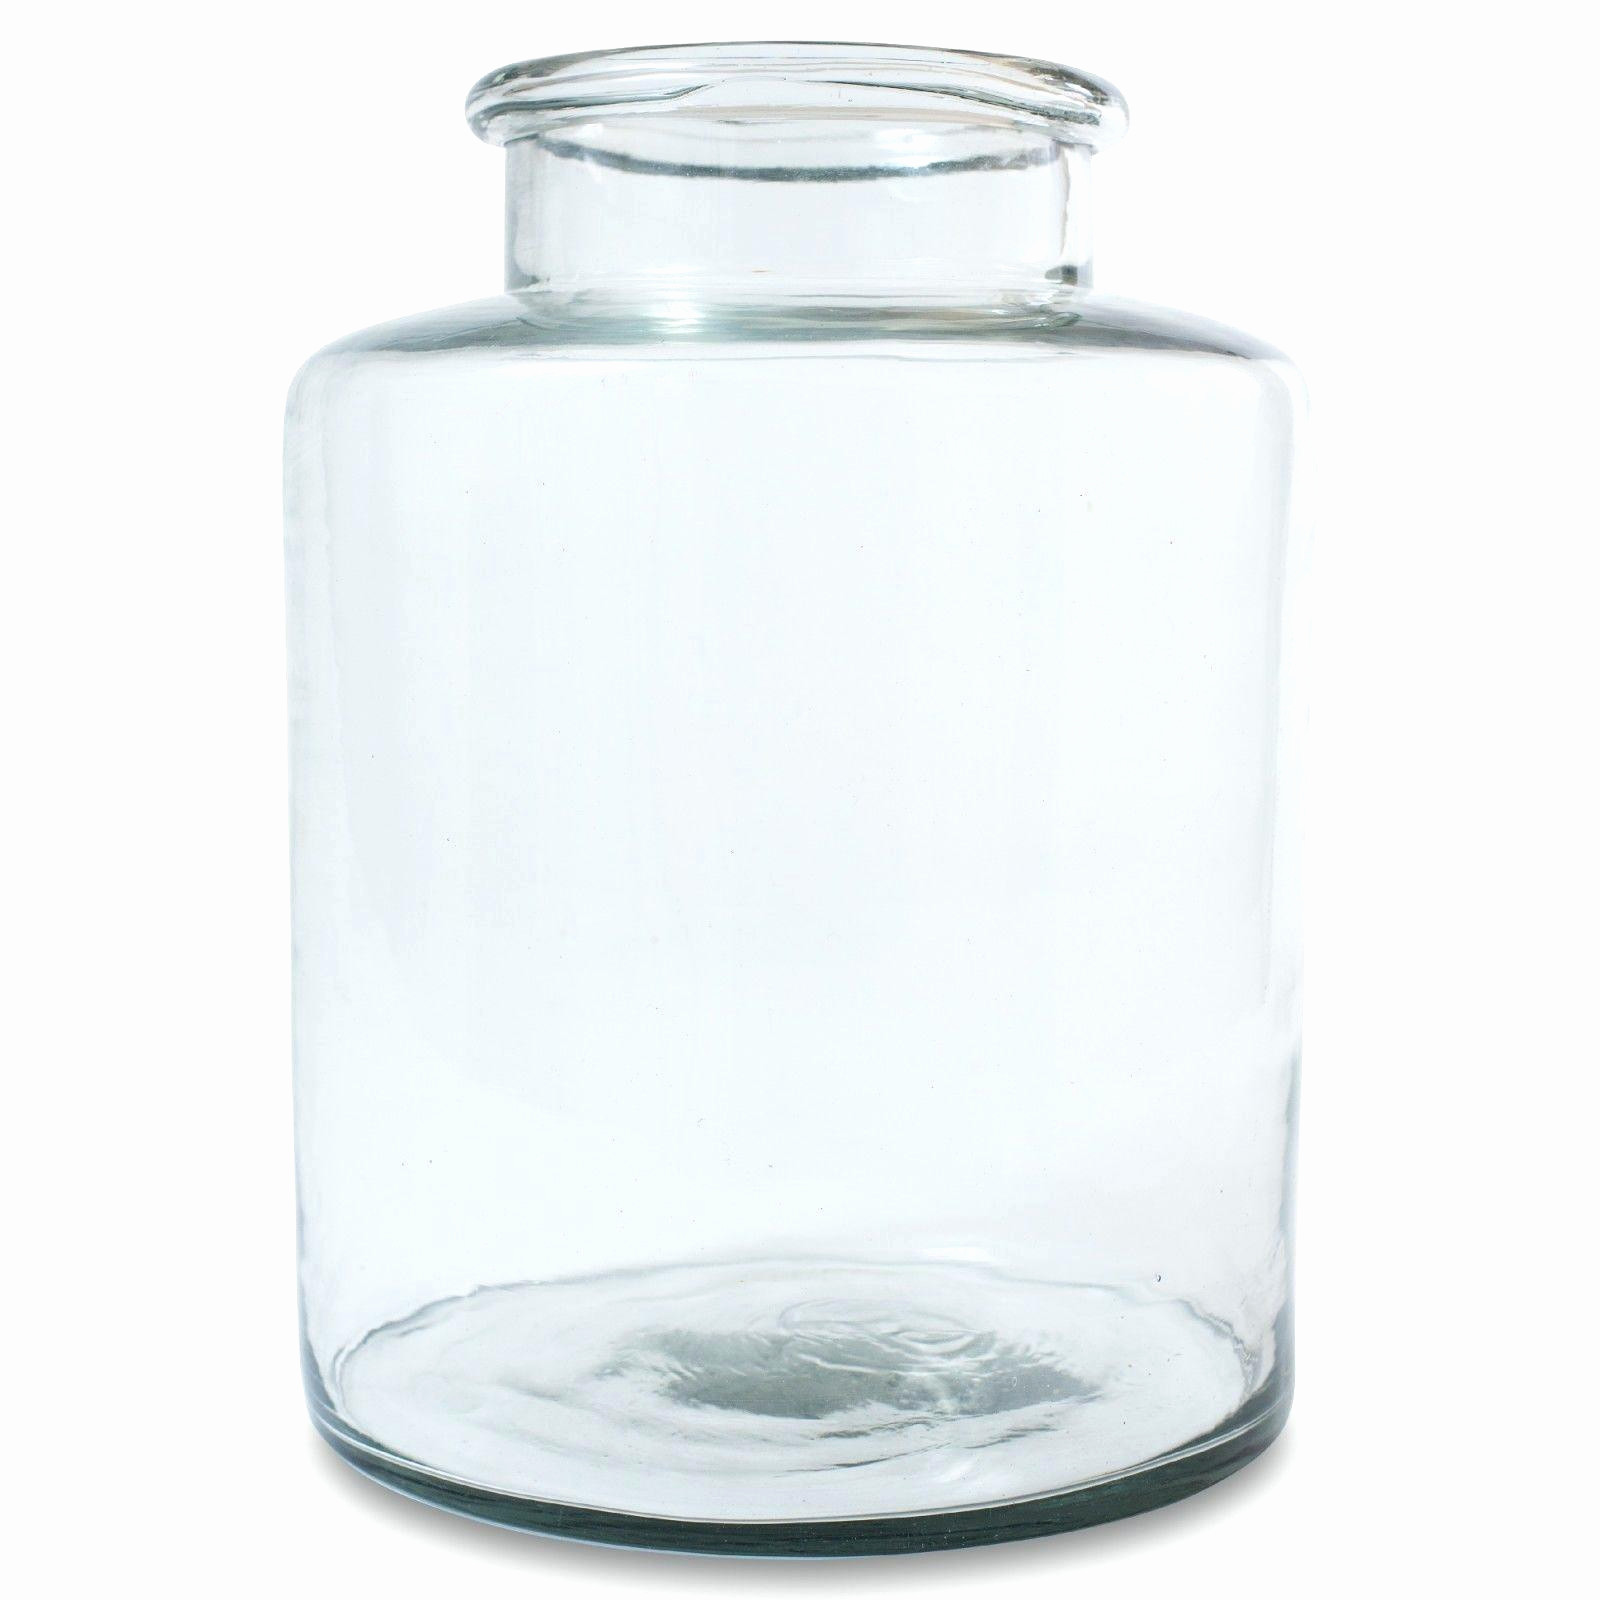 13 Perfect Hoosier Glass Vase 4063 B 2024 free download hoosier glass vase 4063 b of 3 foot glass vase vase and cellar image avorcor com with regard to gl vase with lid and cellar image avorcor